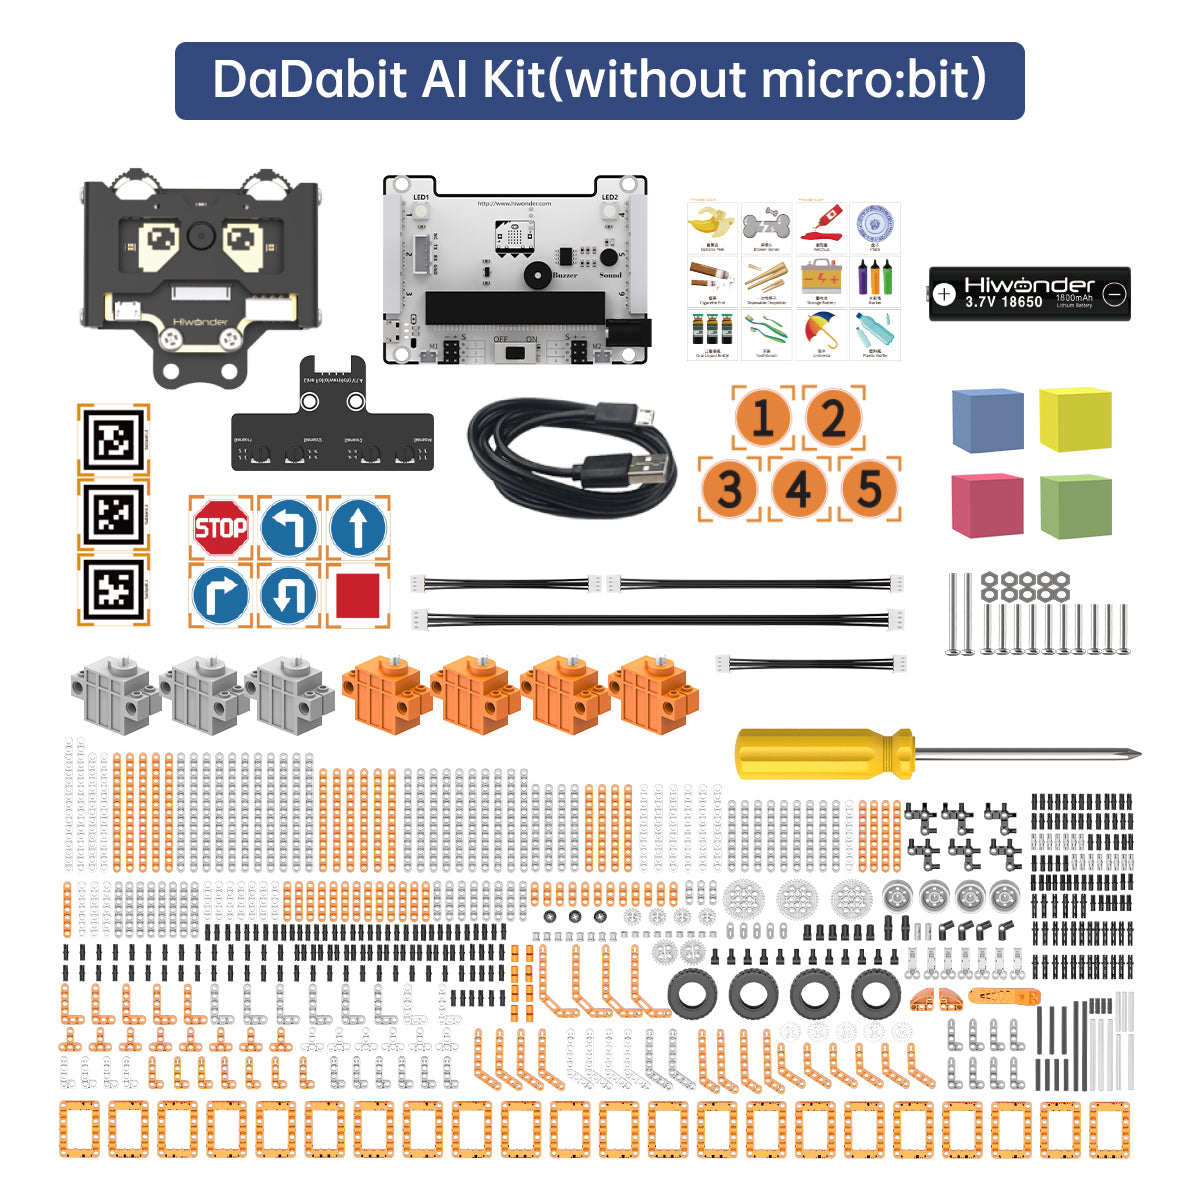 DaDa:bit AI Programmable Building Block Kit Powered by micro:bit with WonderCam AI Vision Module Supports Sensor Expansion